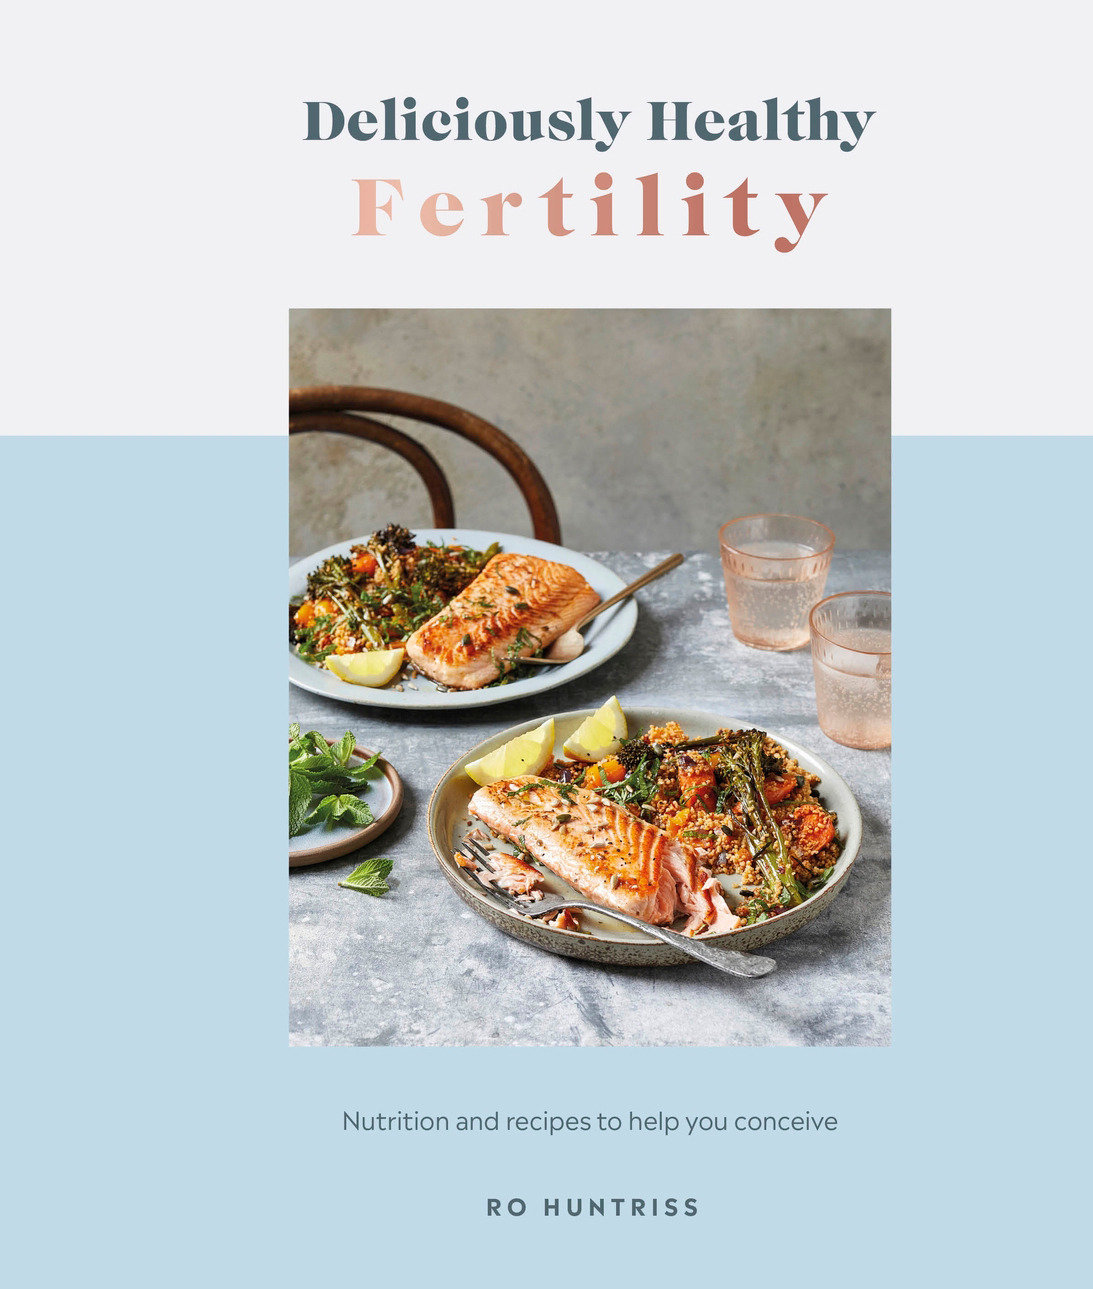 Deliciously Healthy Fertility (Hardcover Book)